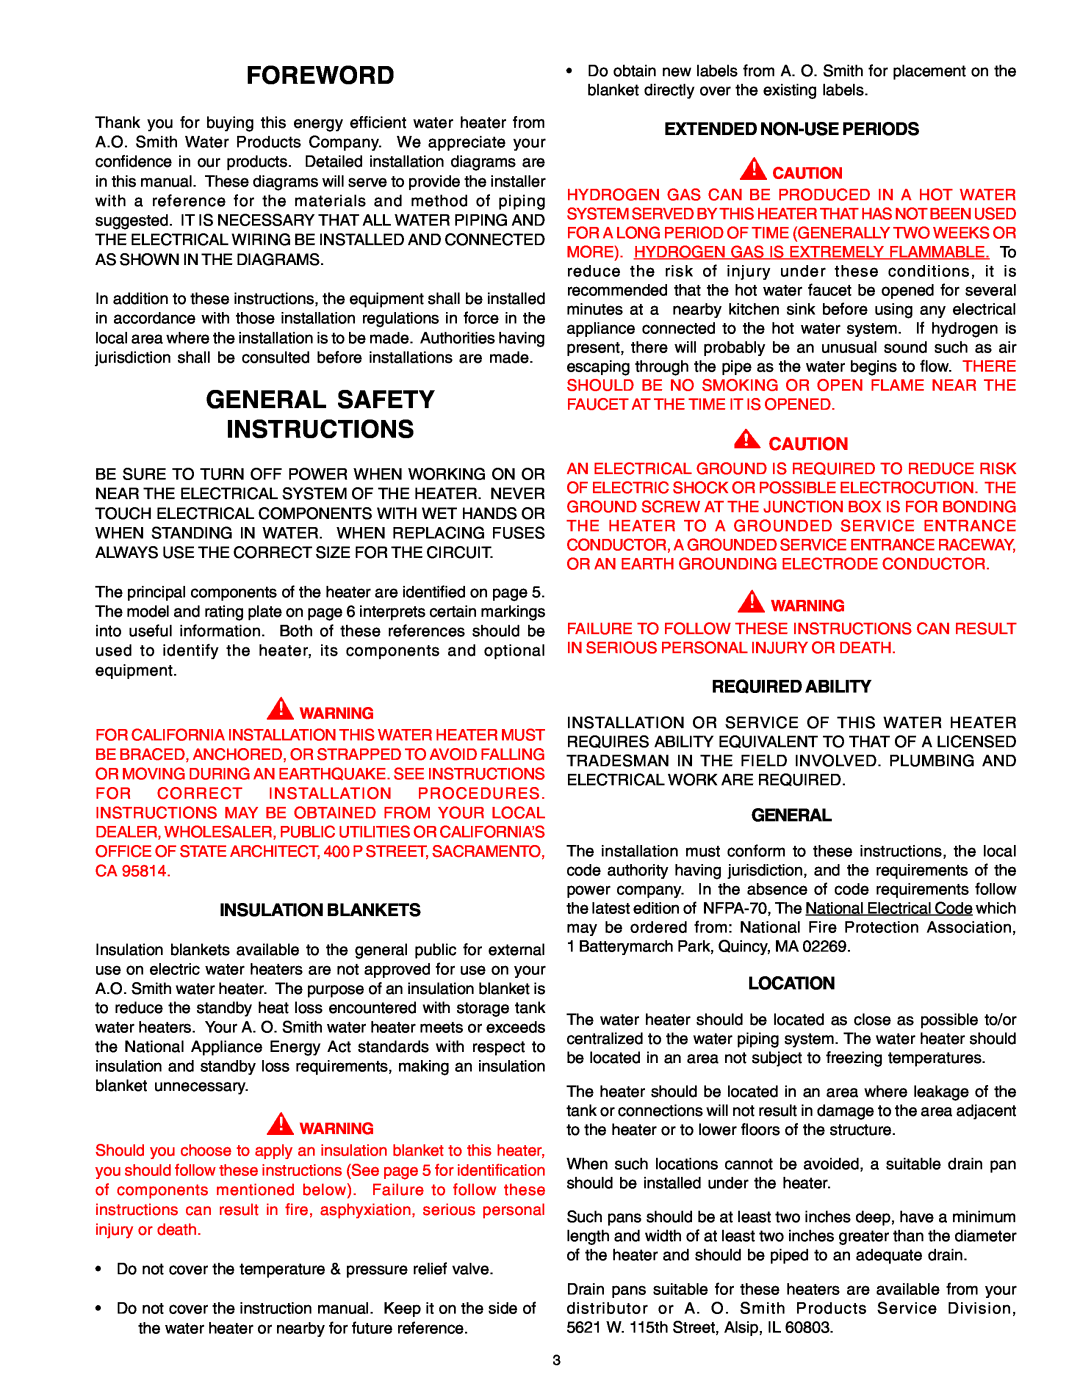 A.O. Smith DEL, DEN Foreword, General Safety Instructions, Insulation Blankets, Extended Non-Use Periods, Required Ability 